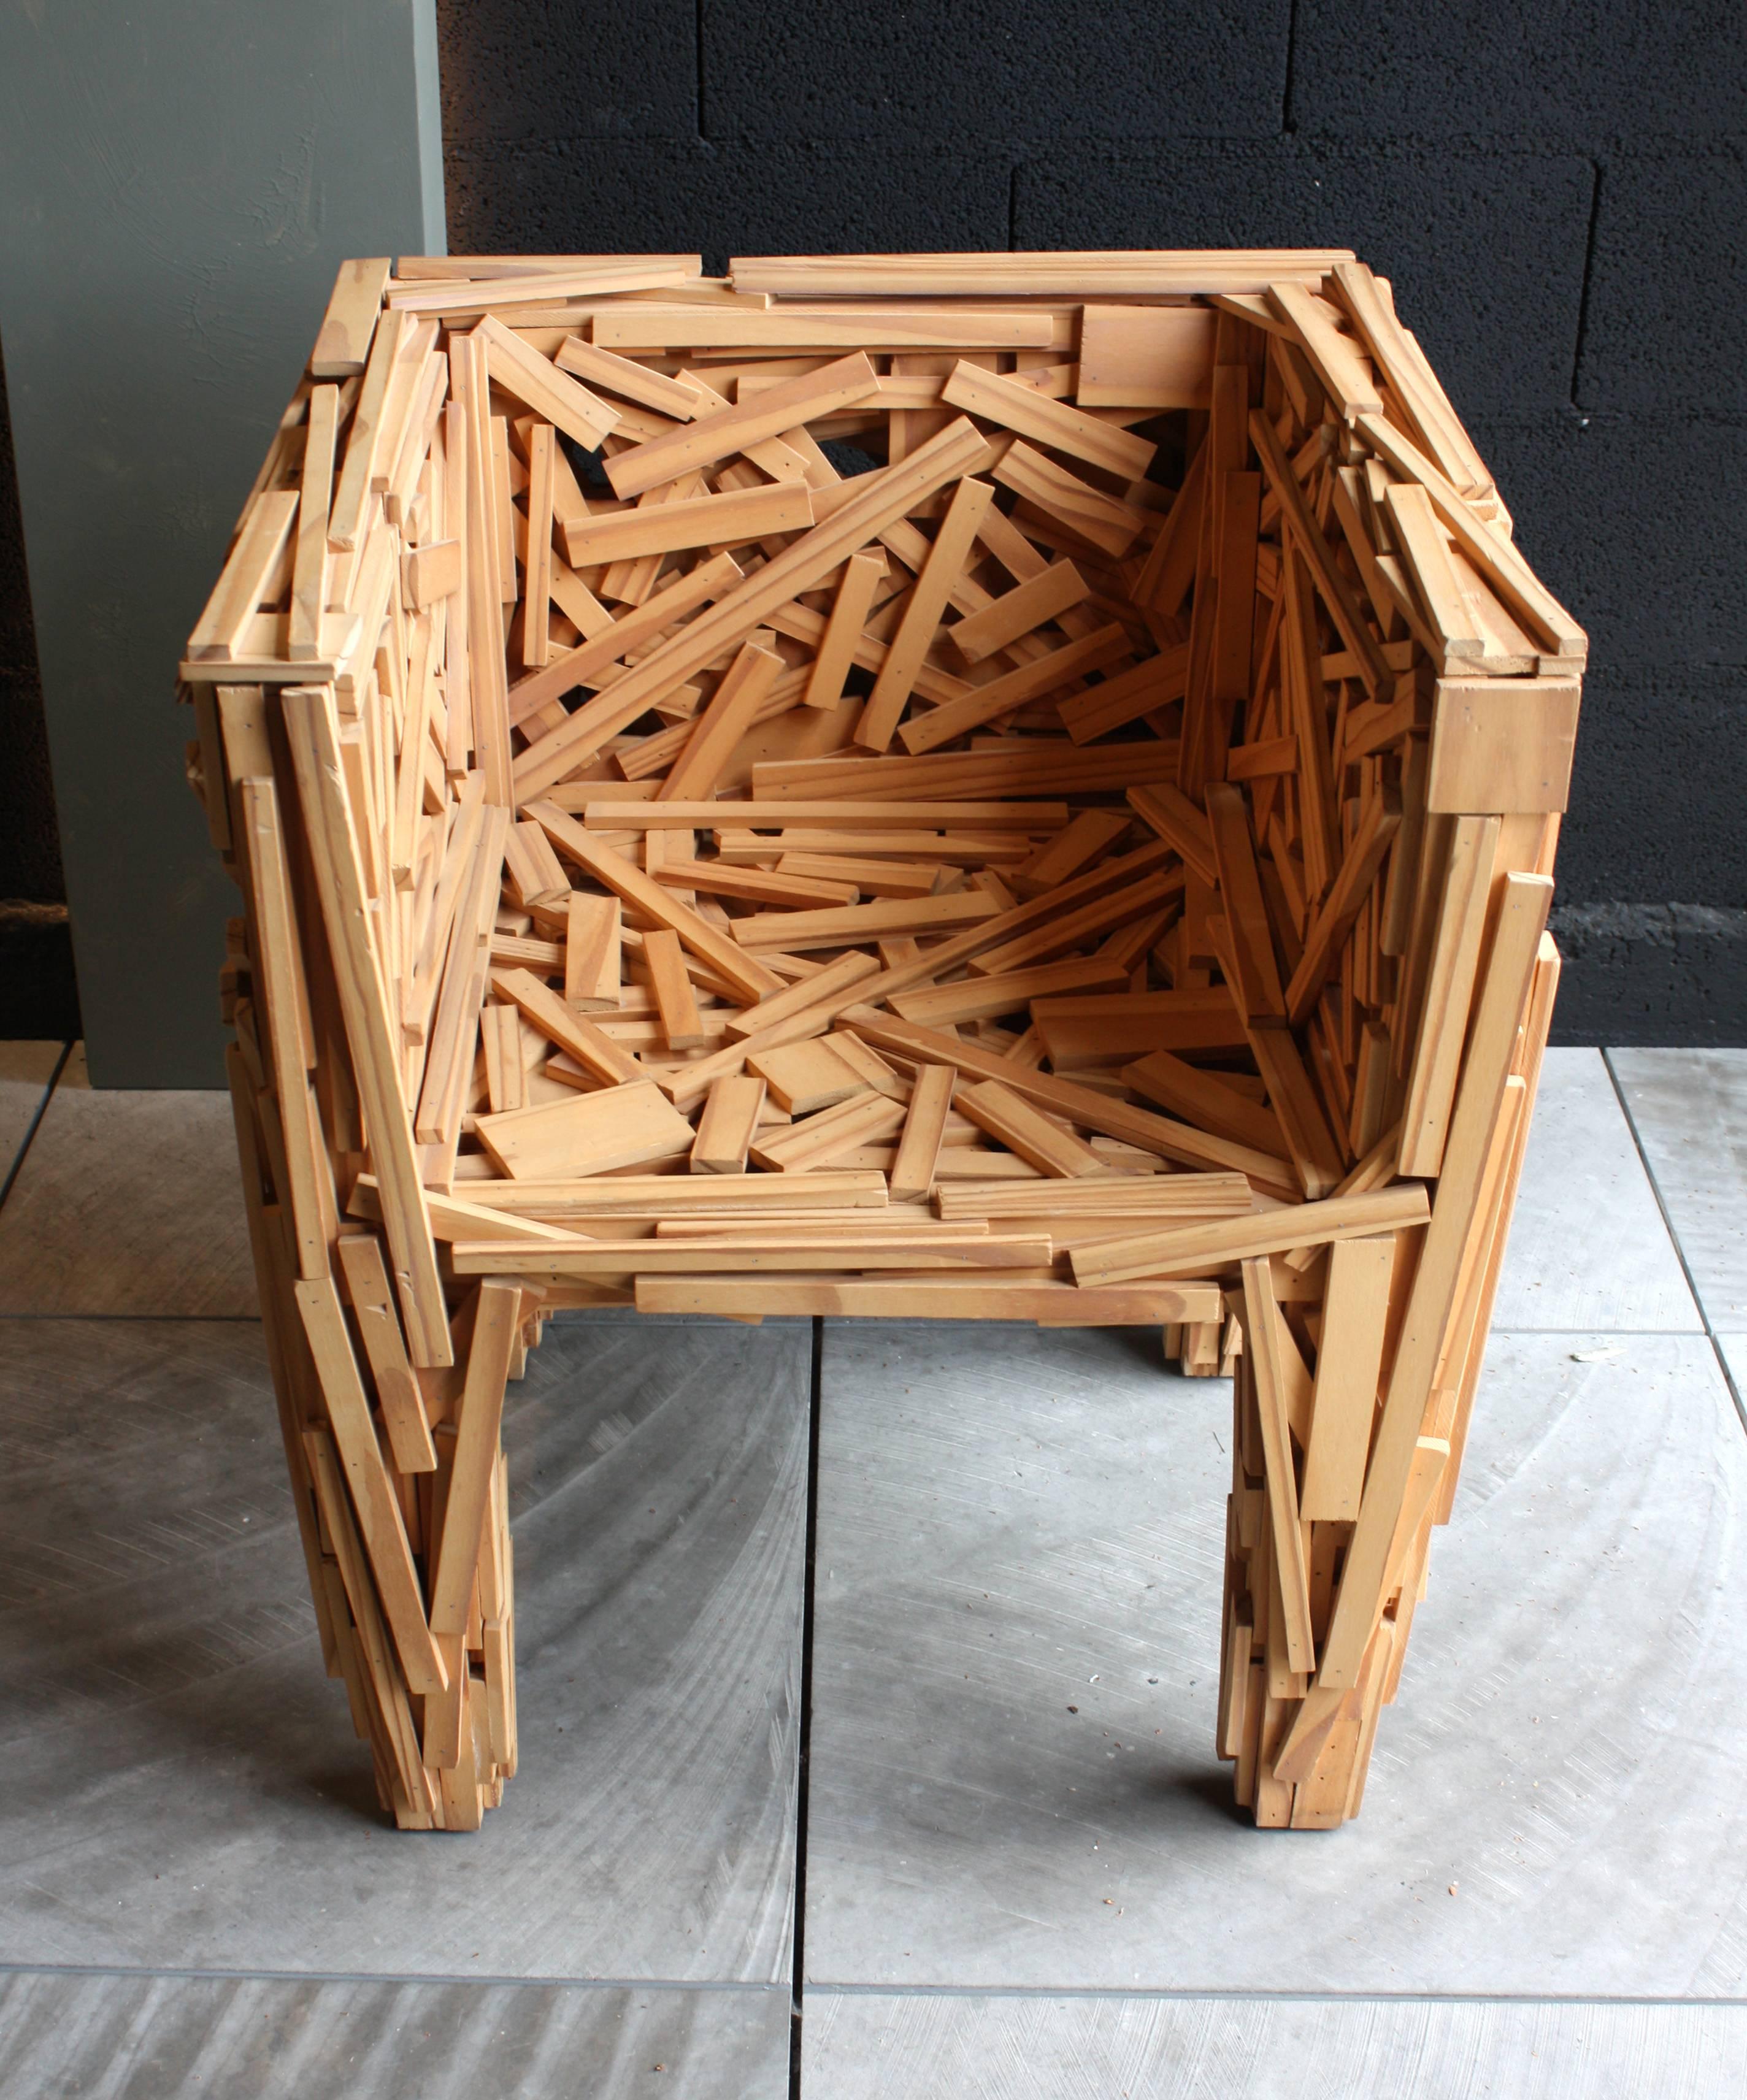 Early Favela armchair designed by Fernando and Humberto Campana for Edra, Italy, 2003. Sculptural chair without internal structure, built with pieces of natural Brazilian Pinus wood, fixed by hand in a deliberately random. Indoor and outdoor use.